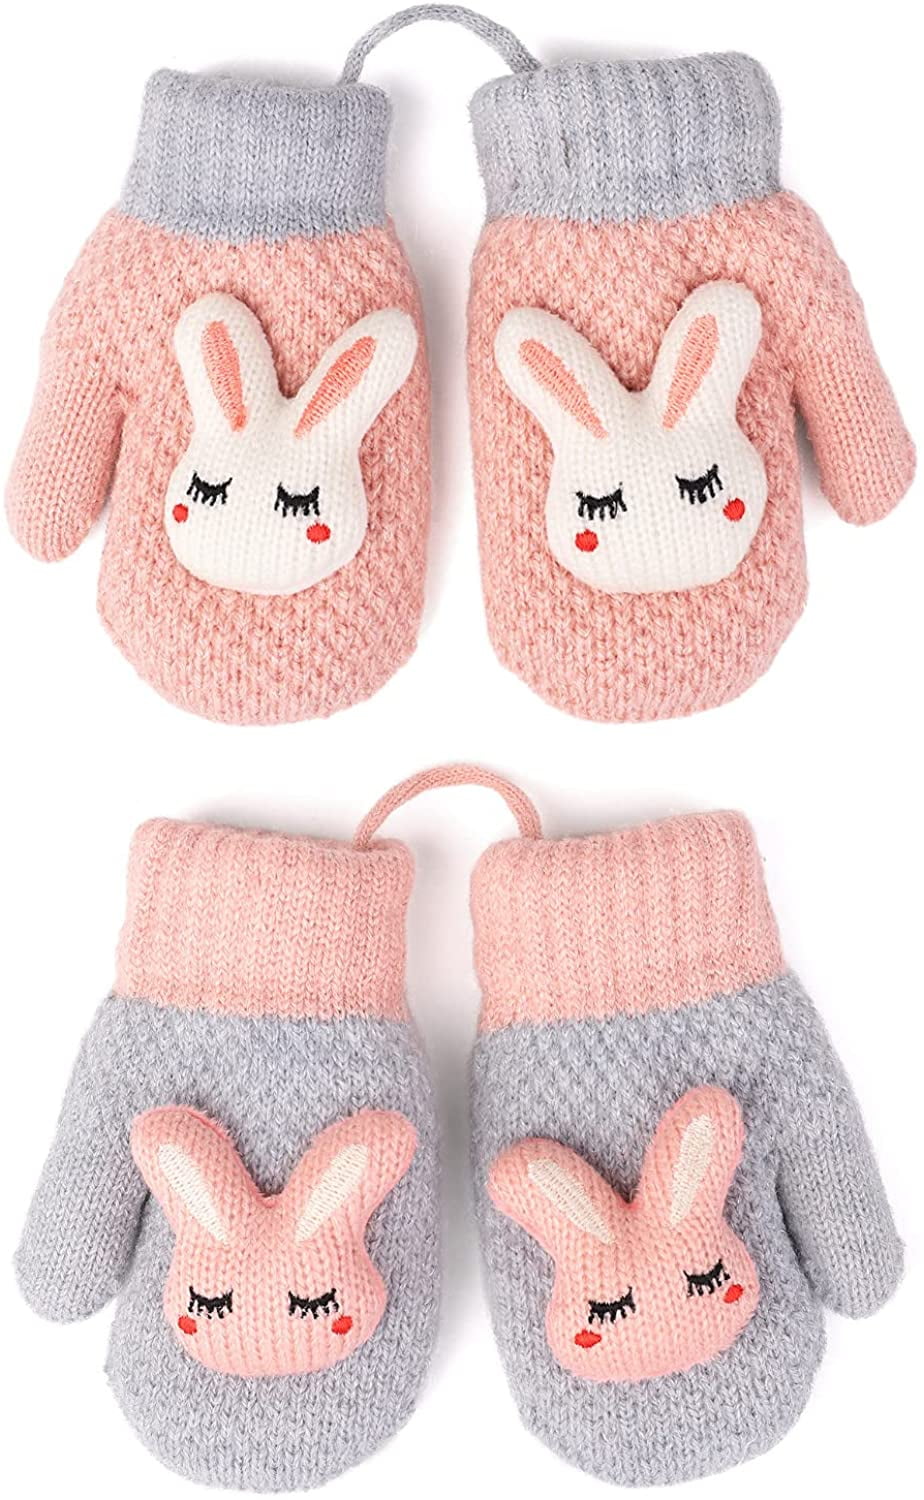 Boys Girls Knit Gloves Winter Plush-lined Cartoon Mittens Gloves with String